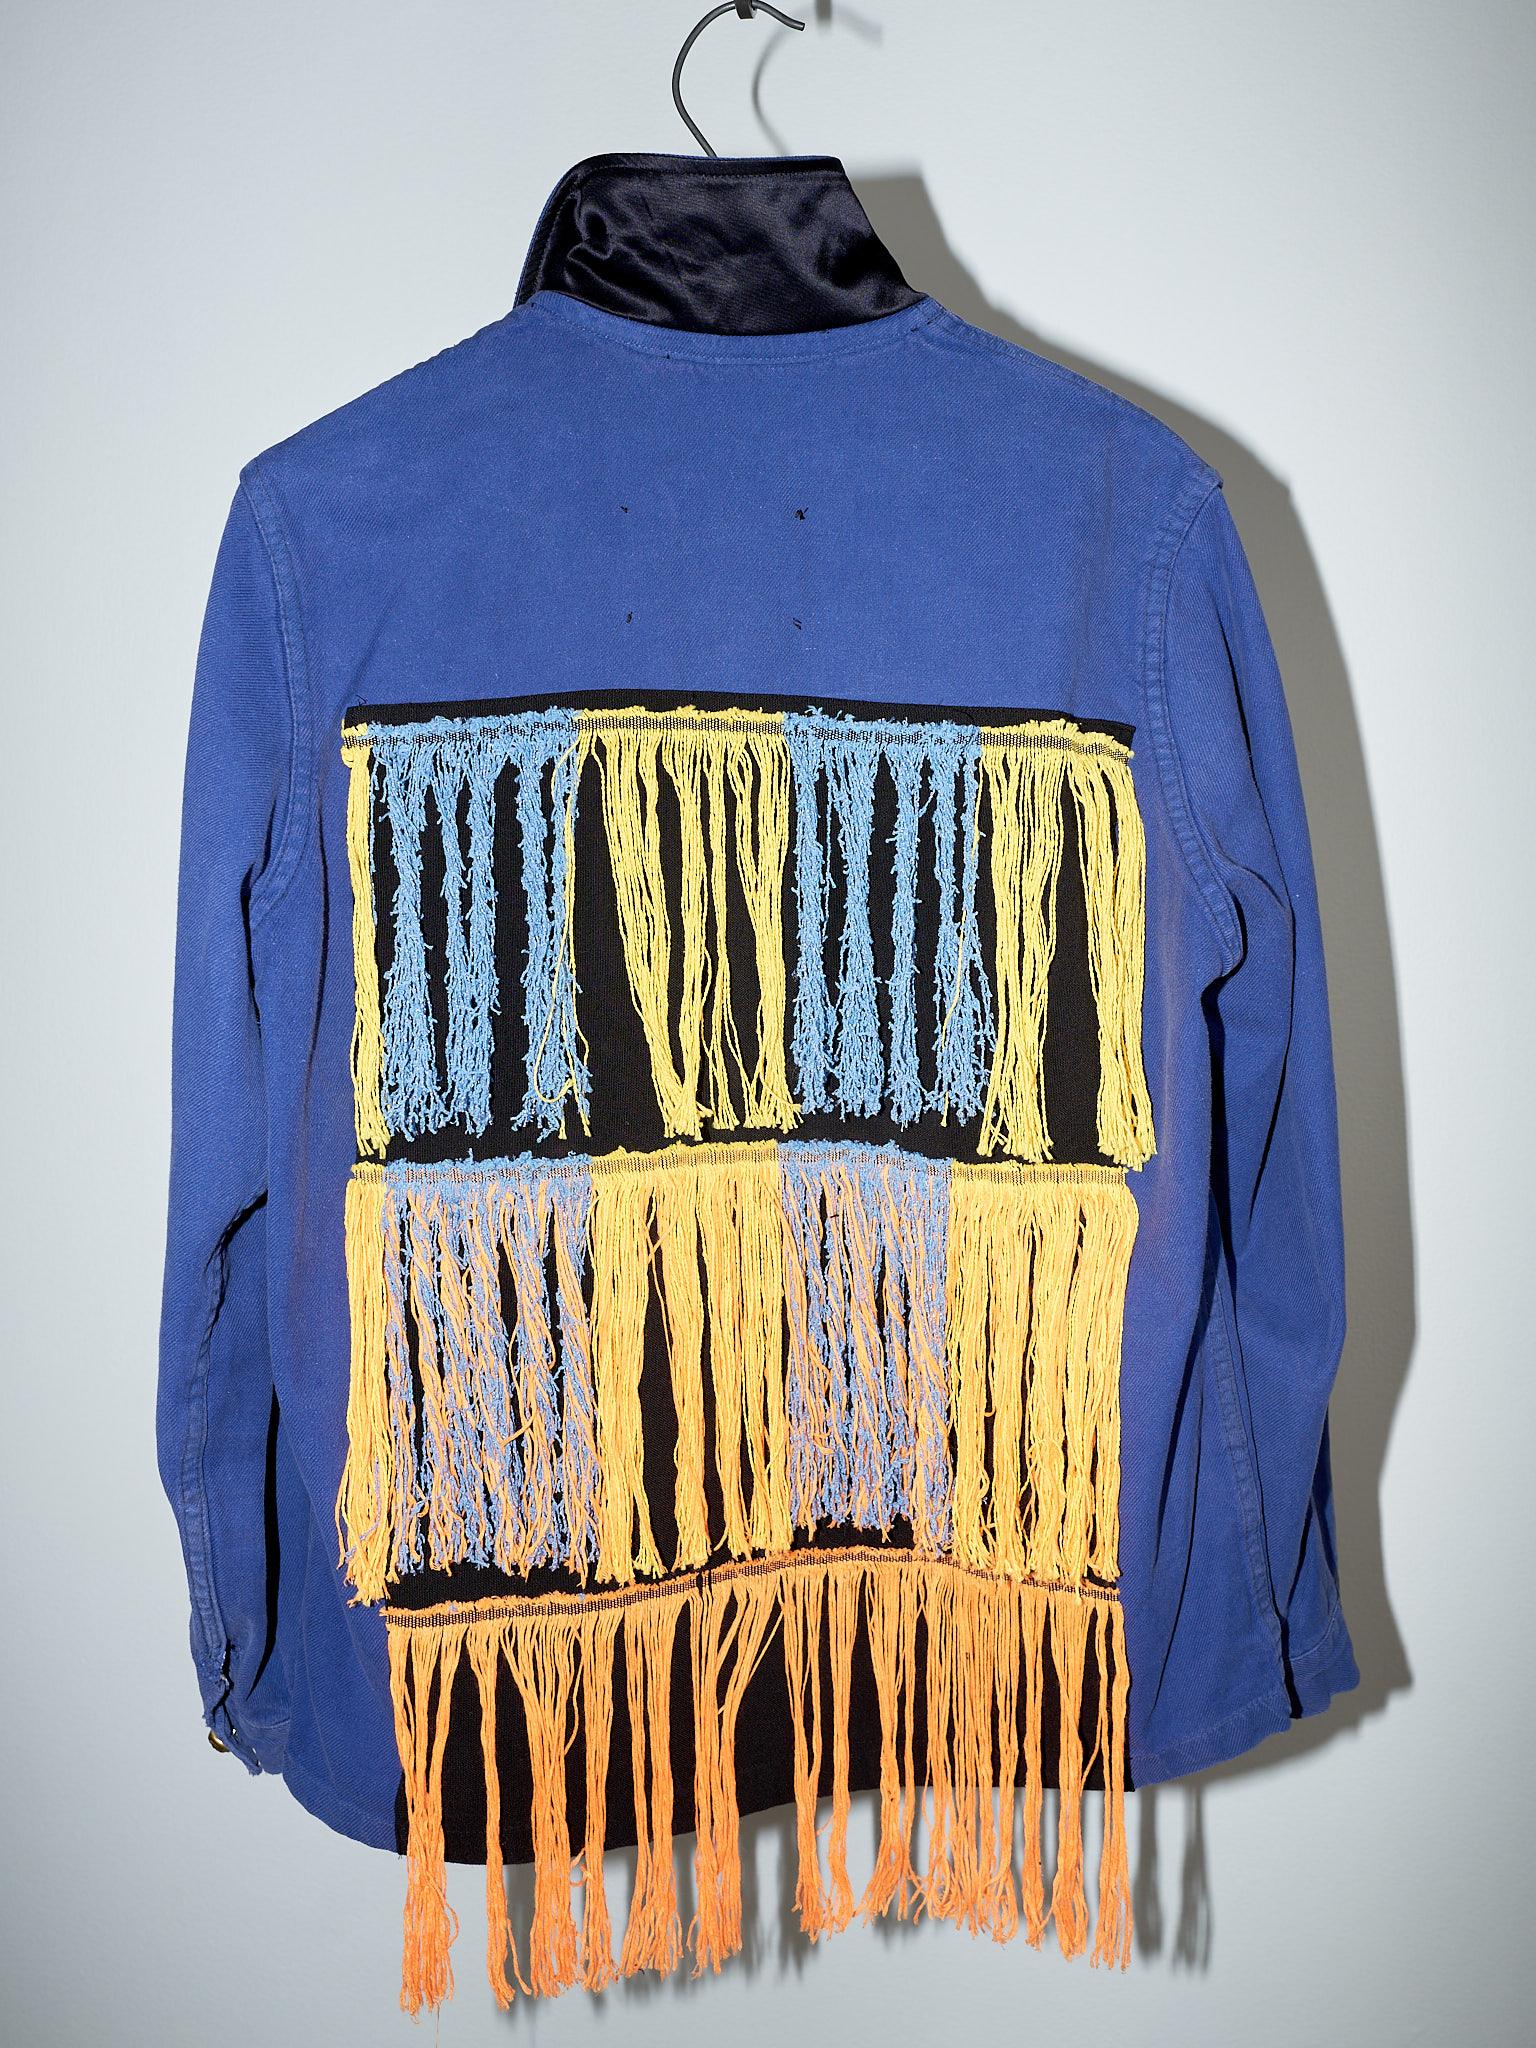 Fringe Yellow Orange Blue Jacket Work France One of a Kind Small For Sale 3